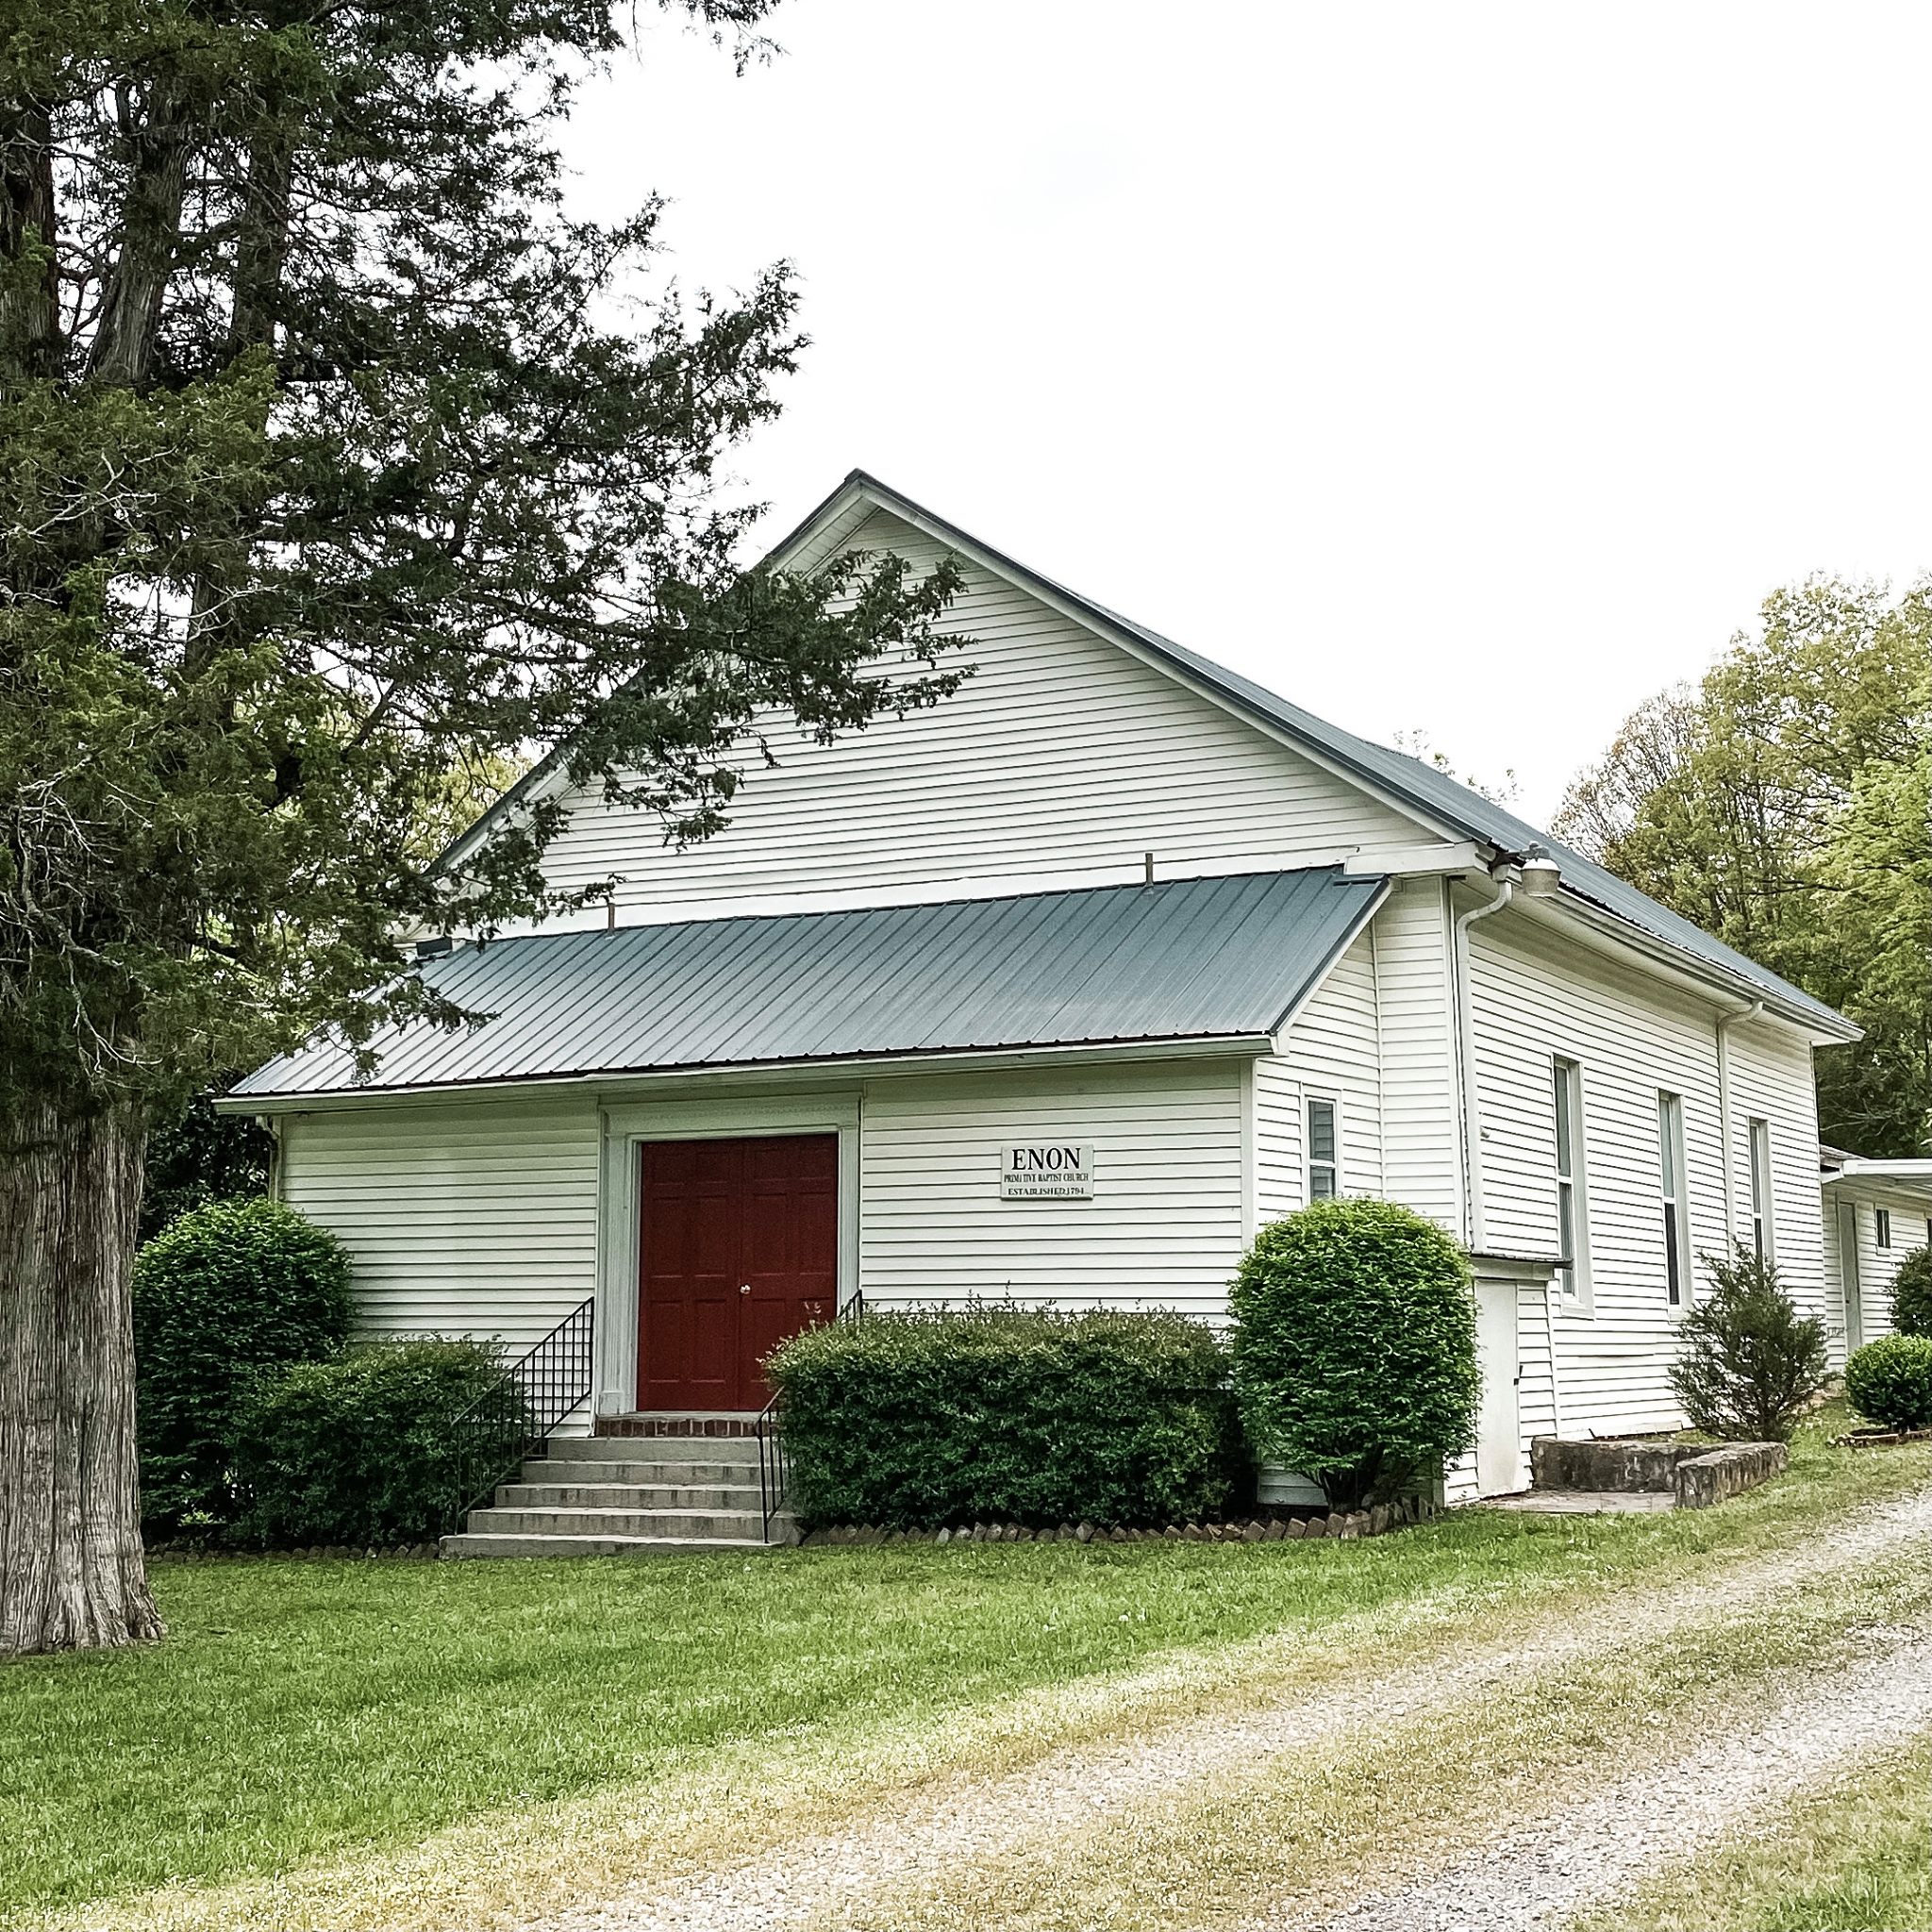 Eagleville Church Dates Back to 1794